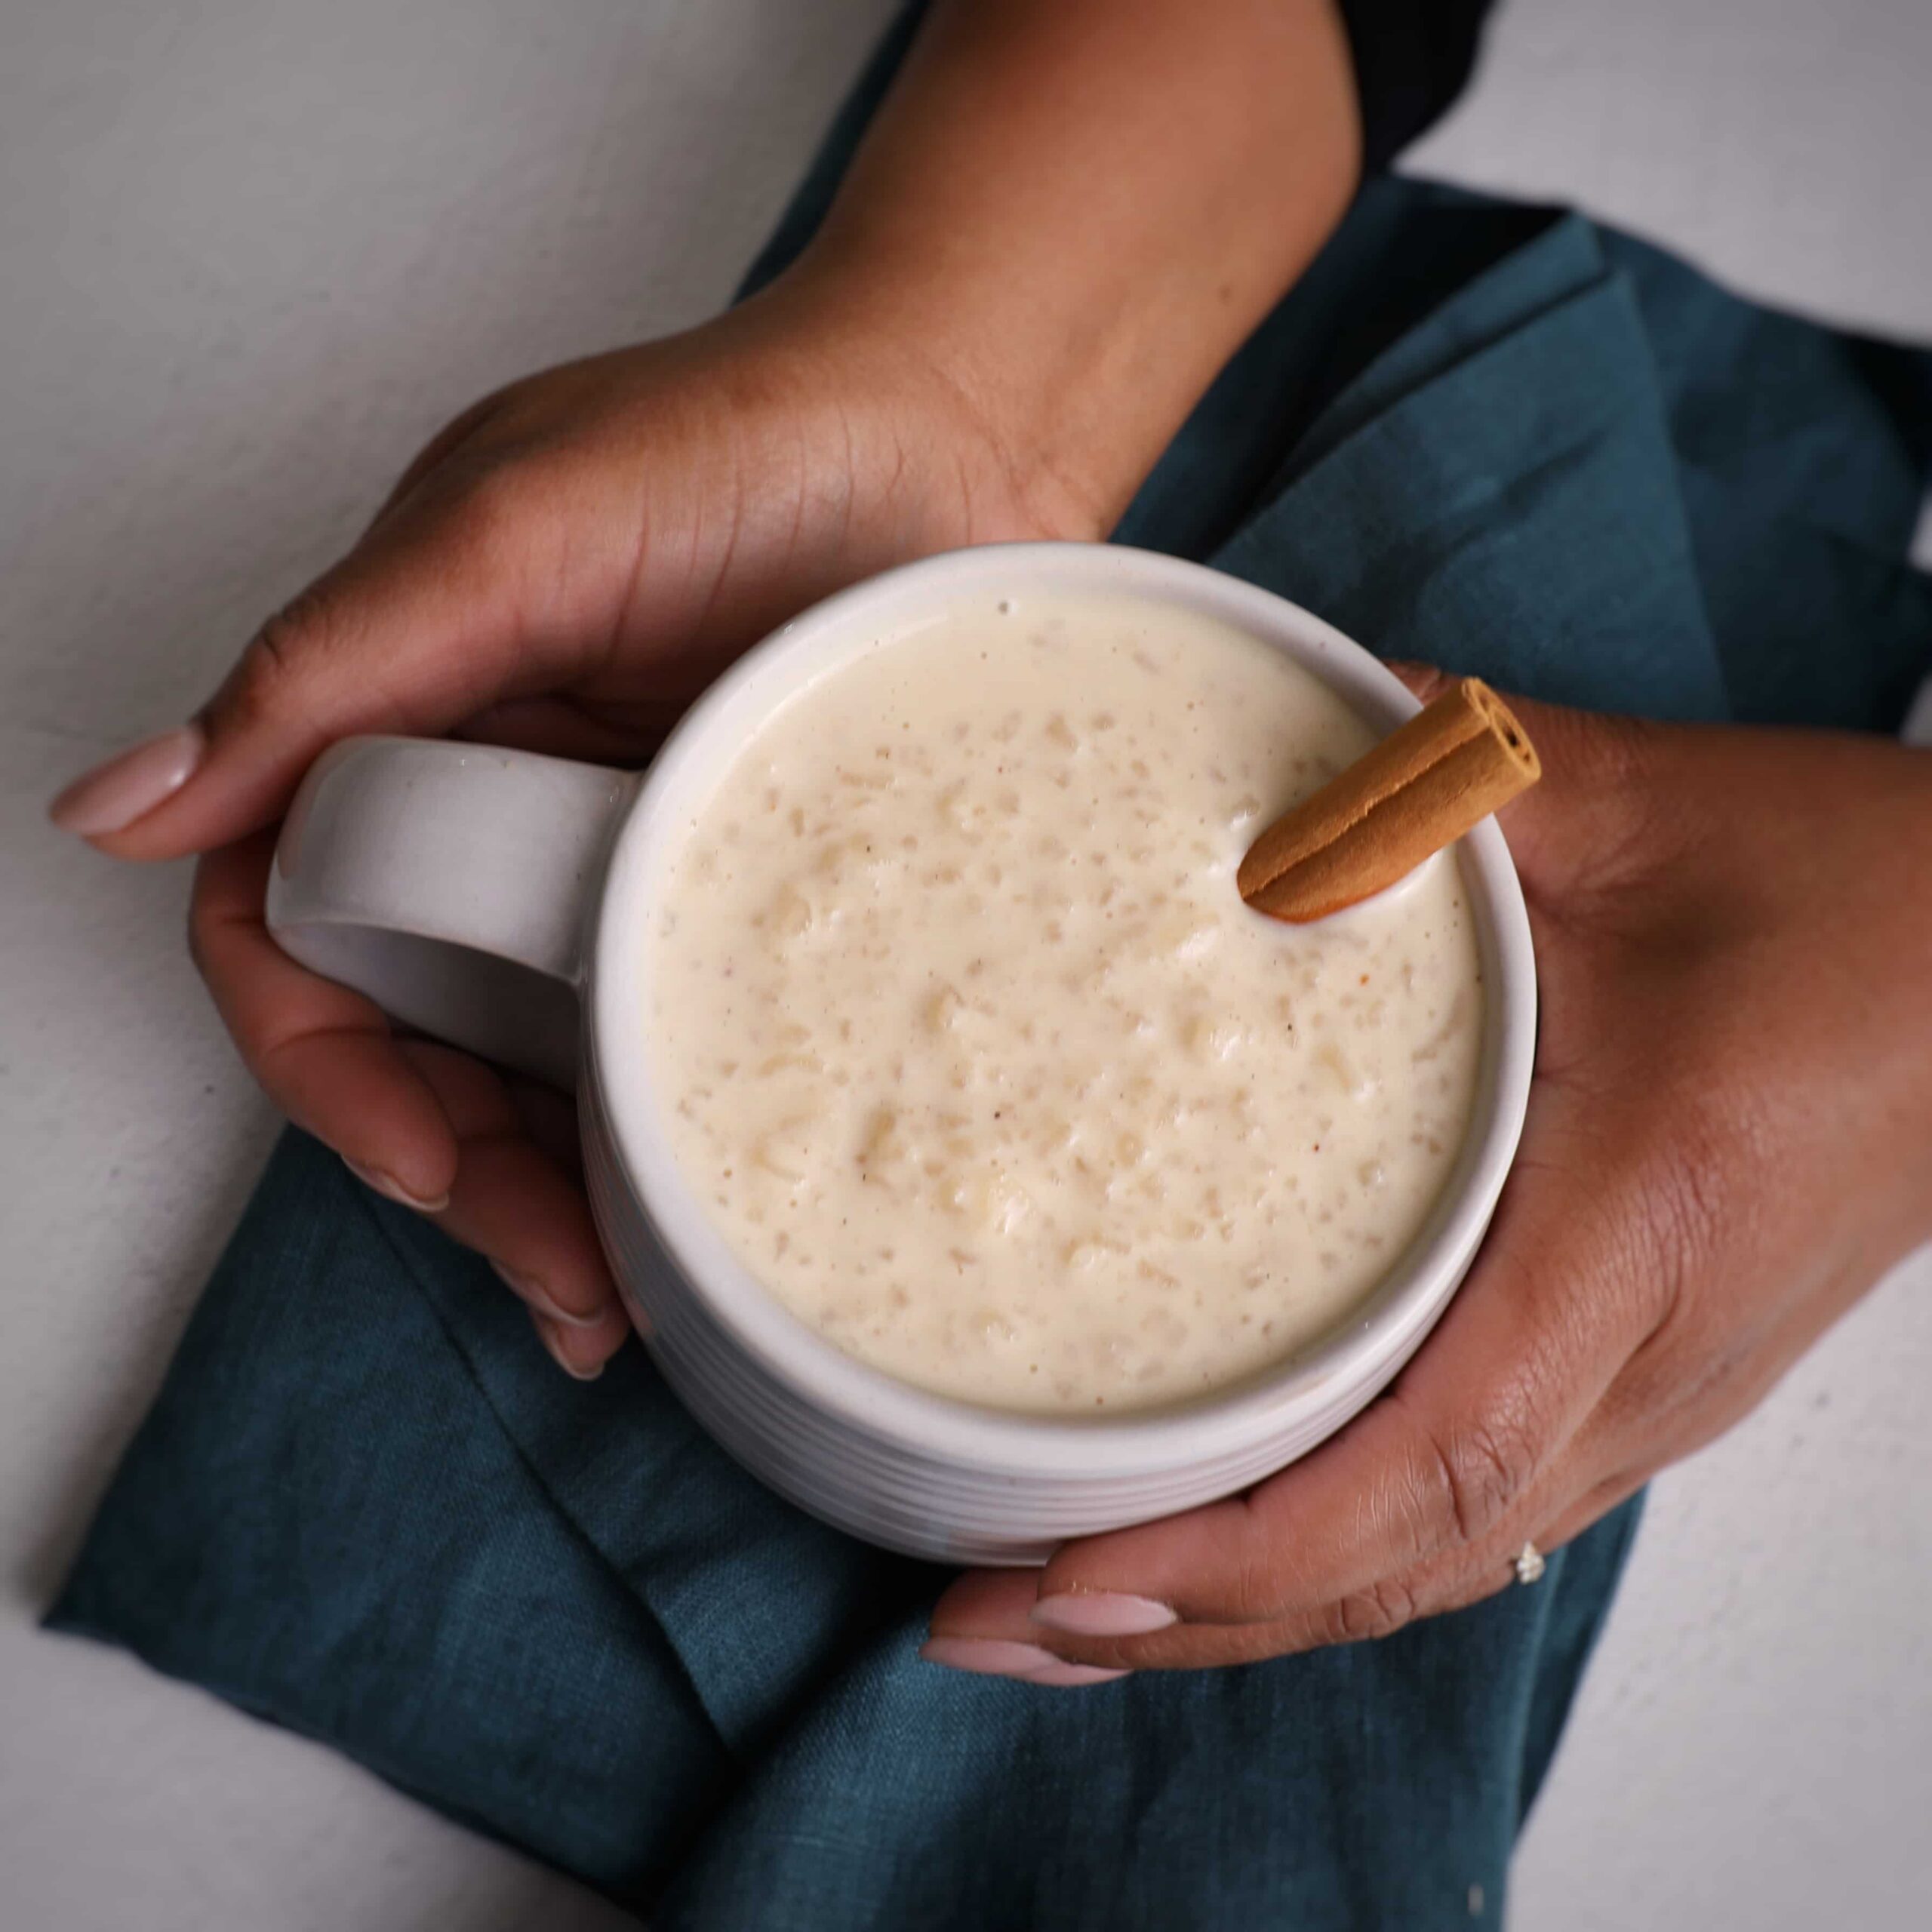 Hands holding a cup filled with porridge and a cinnamon stick sticking out of the top